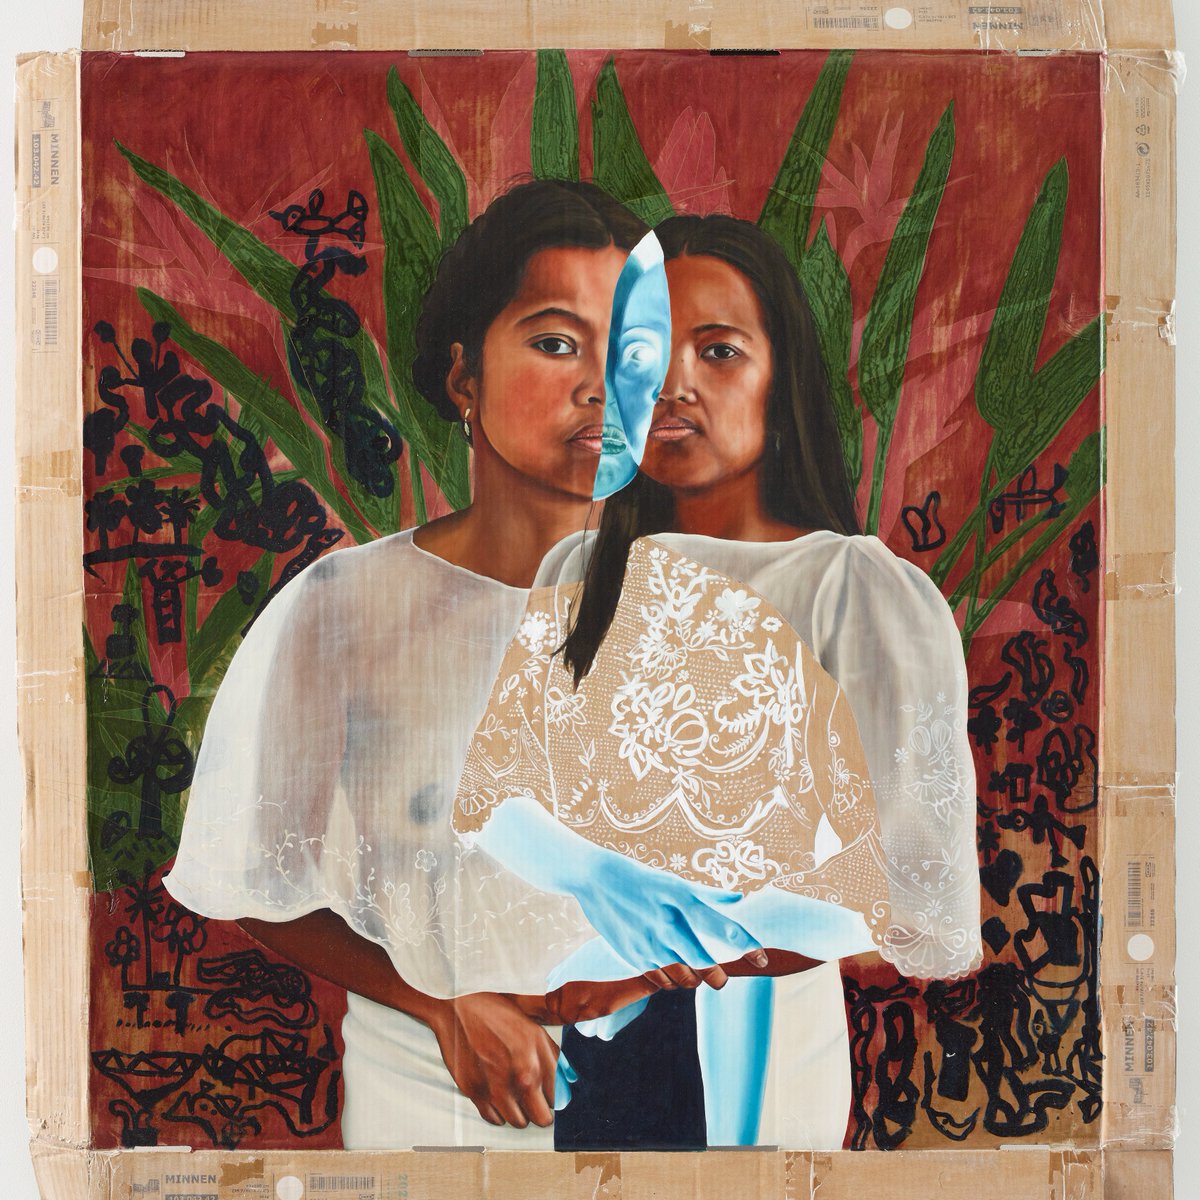 Exhibition announcement. 'Marikit Santiago: The kingdom, the power' brings together recent works by celebrated Western Sydney artist Marikit Santiago in her inaugural Victorian solo exhibition. Exhibition dates 28 October 2023 - 4 February 2024. bit.ly/MarikitSantiag…